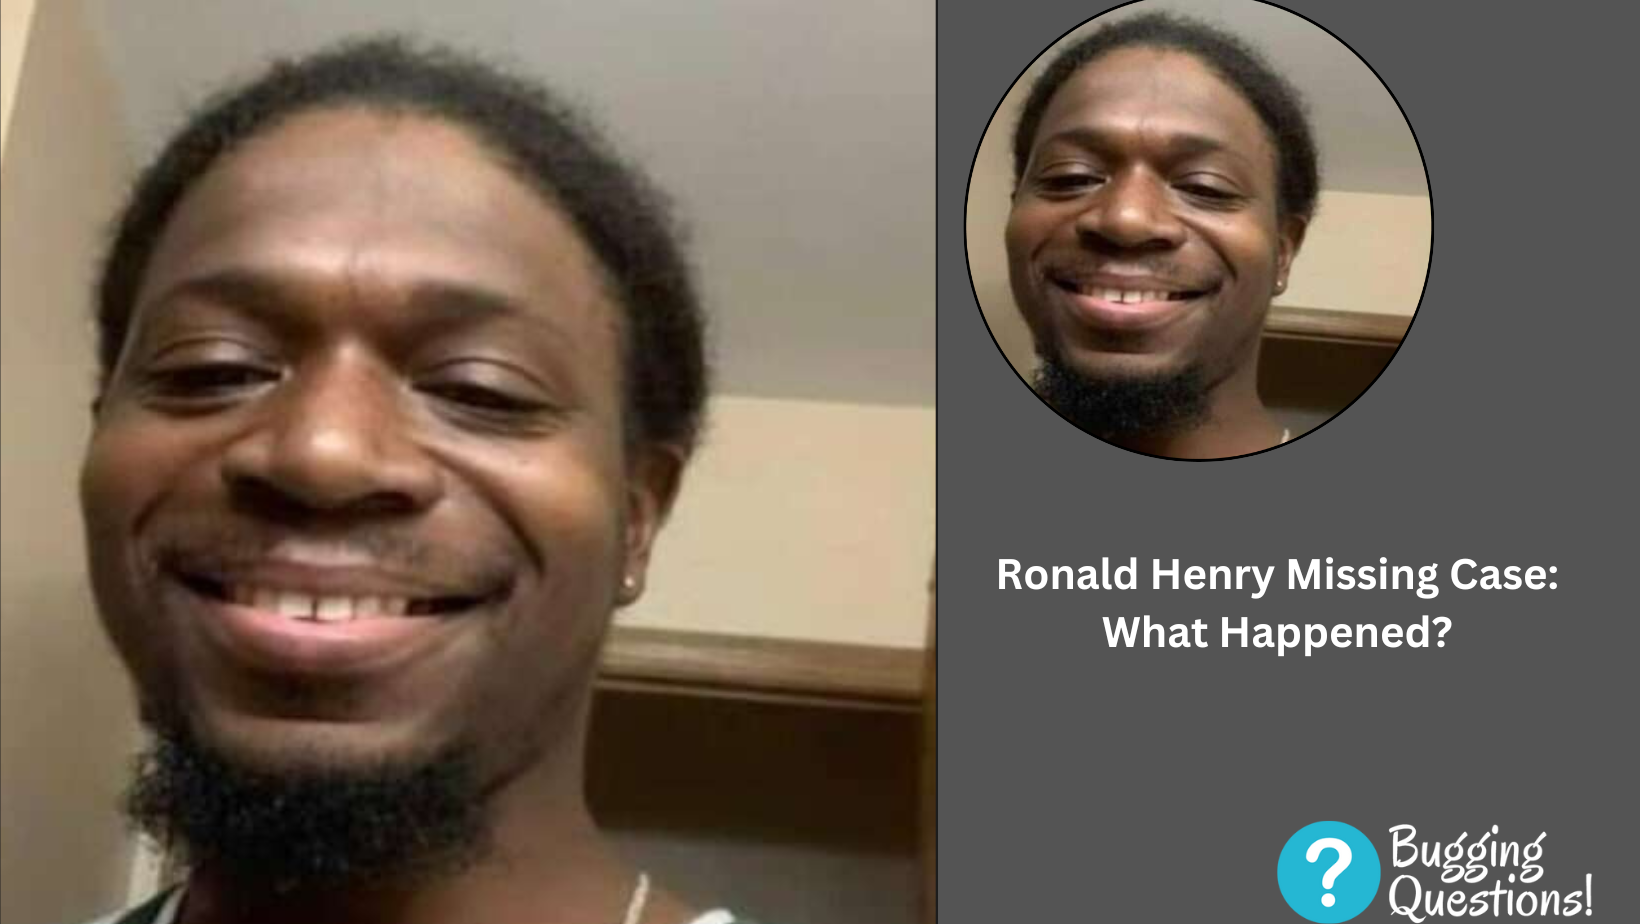 Ronald Henry Missing Case: What Happened?